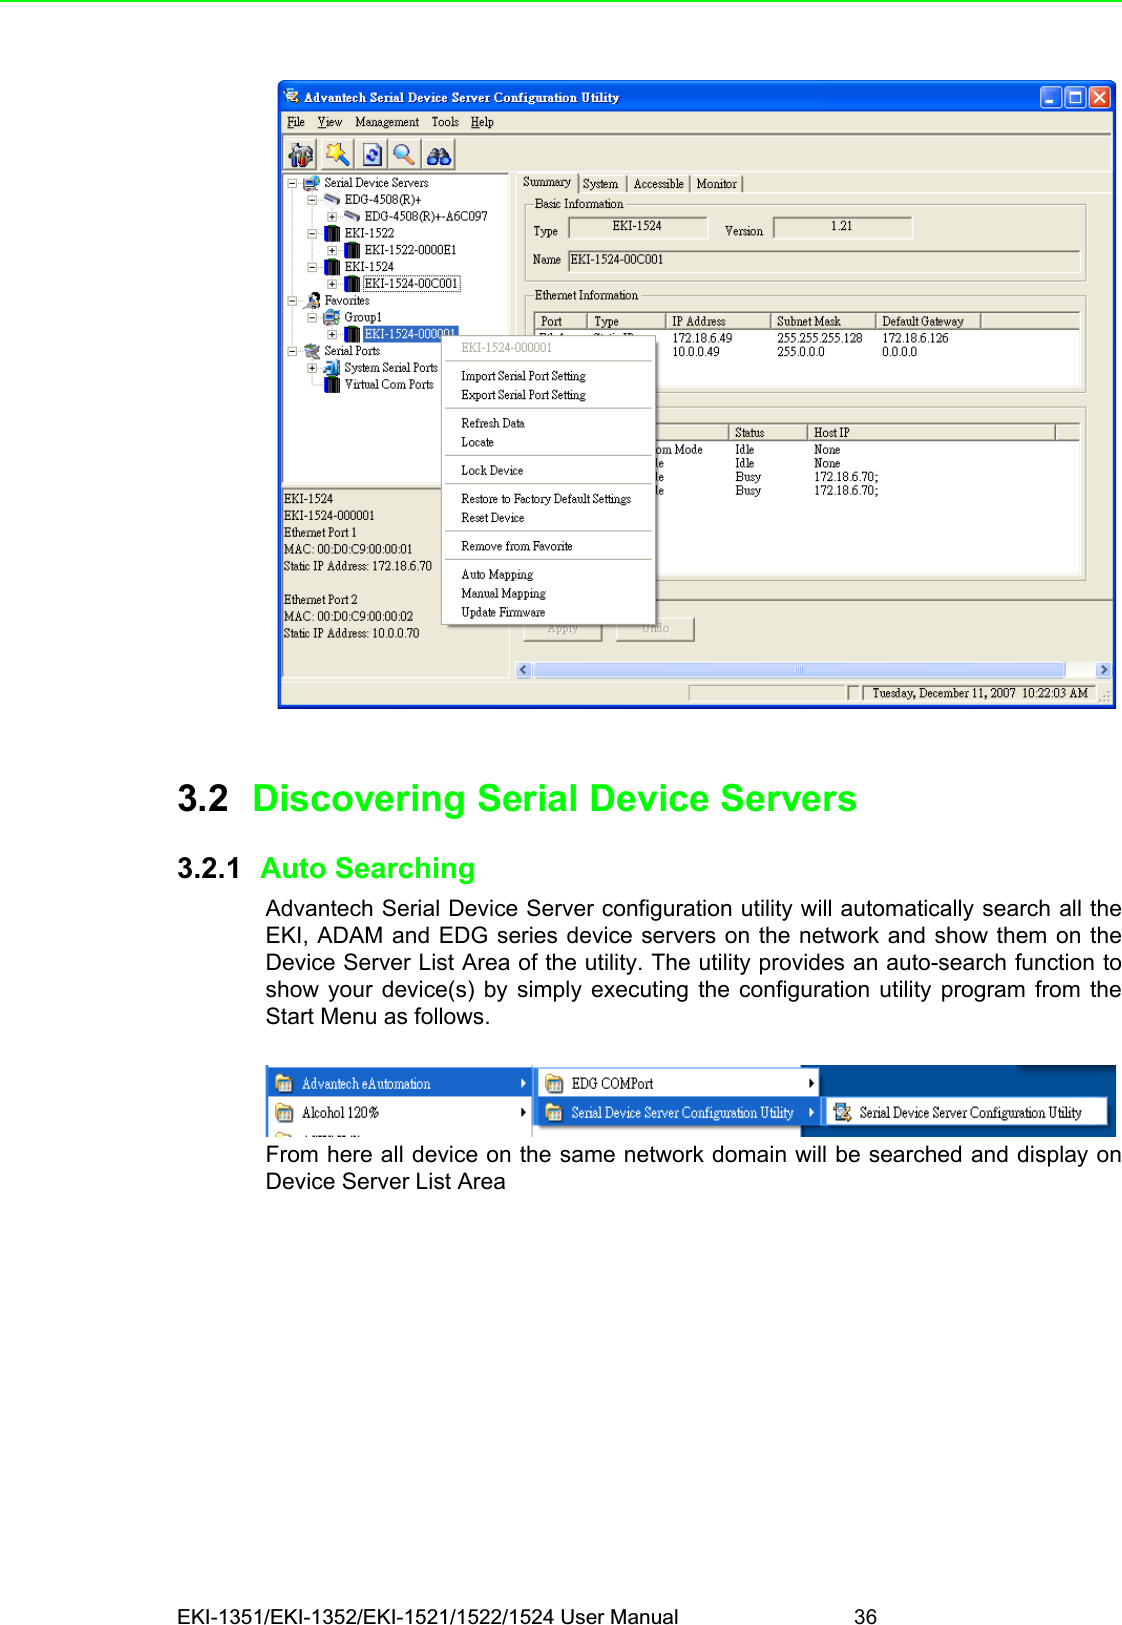 EKI-1351/EKI-1352/EKI-1521/1522/1524 User Manual 363.2 Discovering Serial Device Servers3.2.1  Auto SearchingAdvantech Serial Device Server configuration utility will automatically search all theEKI, ADAM and EDG series device servers on the network and show them on theDevice Server List Area of the utility. The utility provides an auto-search function toshow your device(s) by simply executing the configuration utility program from theStart Menu as follows.From here all device on the same network domain will be searched and display onDevice Server List Area